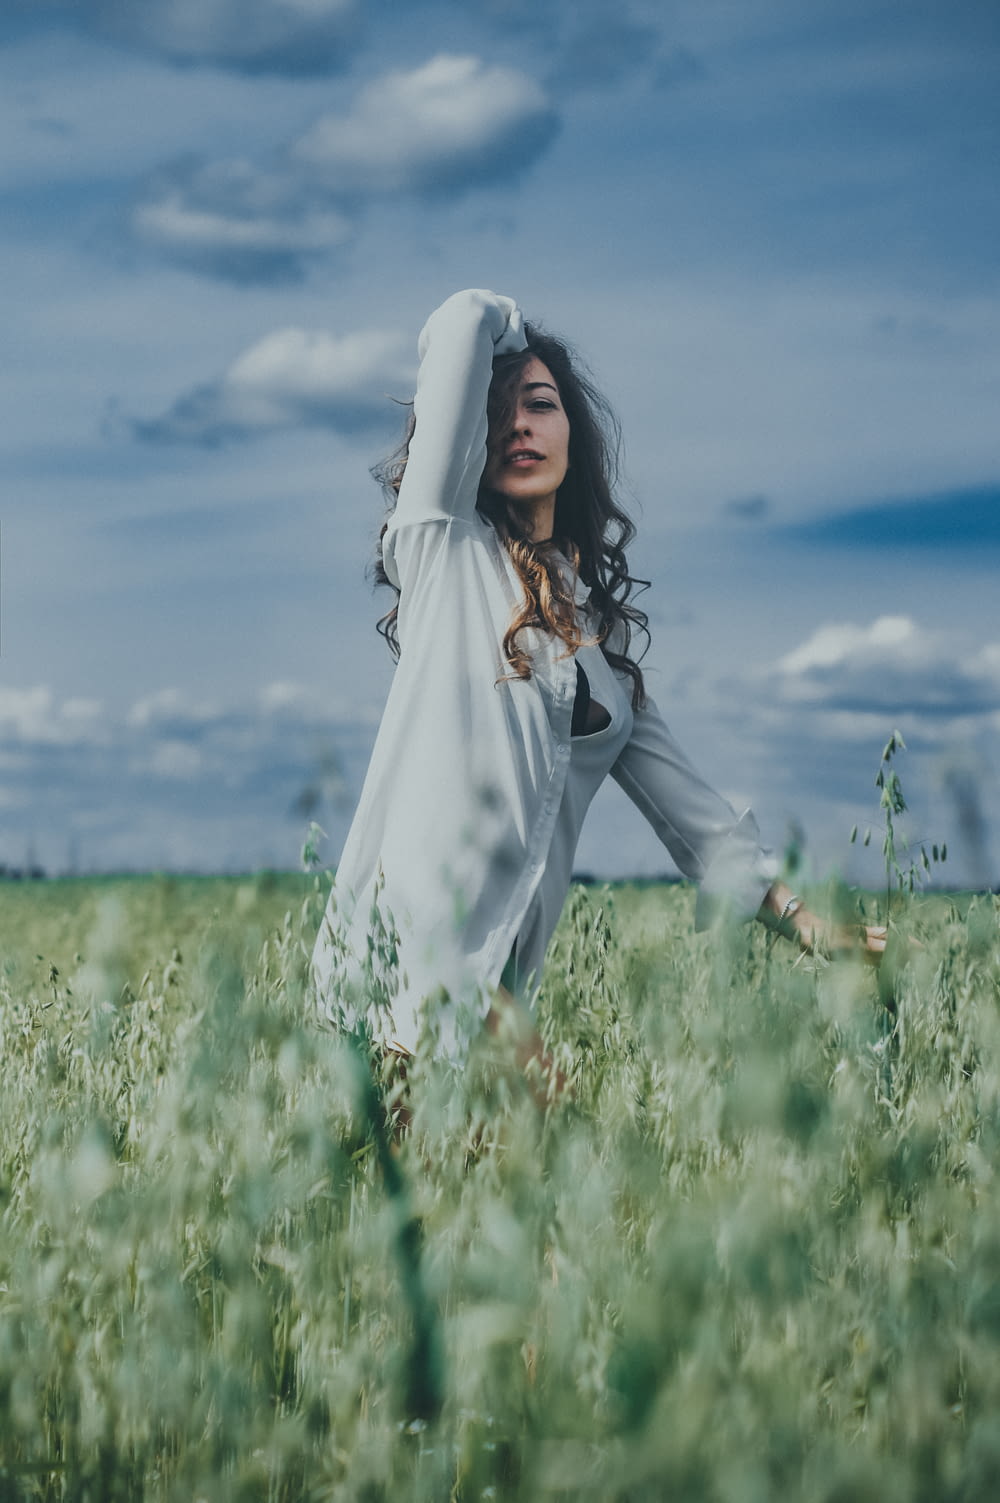 woman in white long sleeve dress standing on green grass field under blue sky during daytime